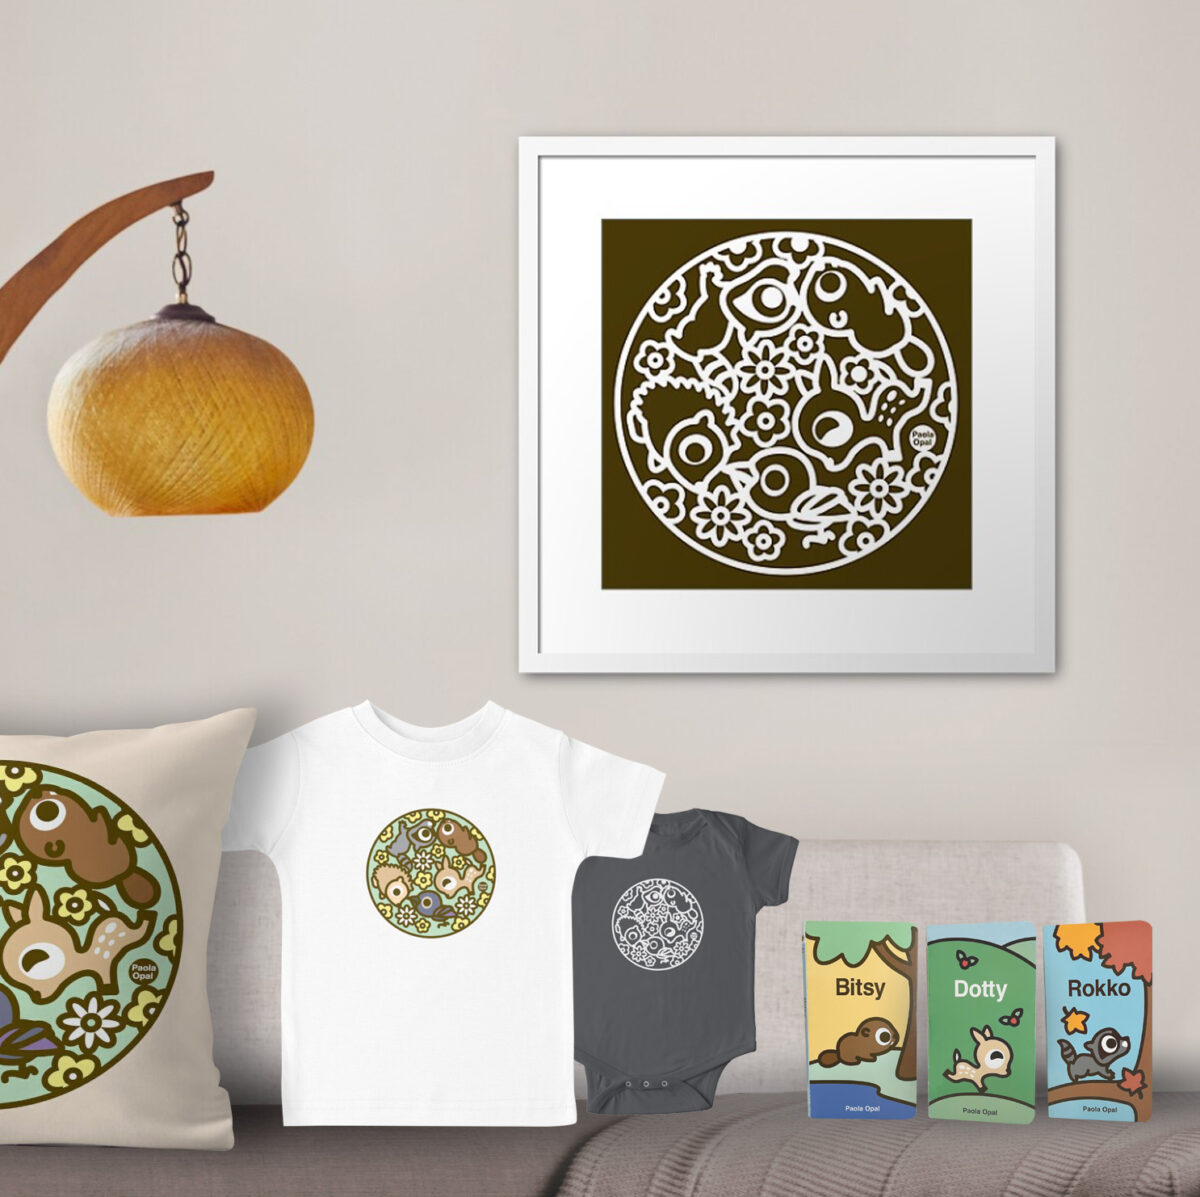 Art print, pillow, t-shirt, baby onesie and books featuring Bitsy the beaver, Rokko the raccoon, Dotty the dear, Kawwa the crow and Emma the hedgehog